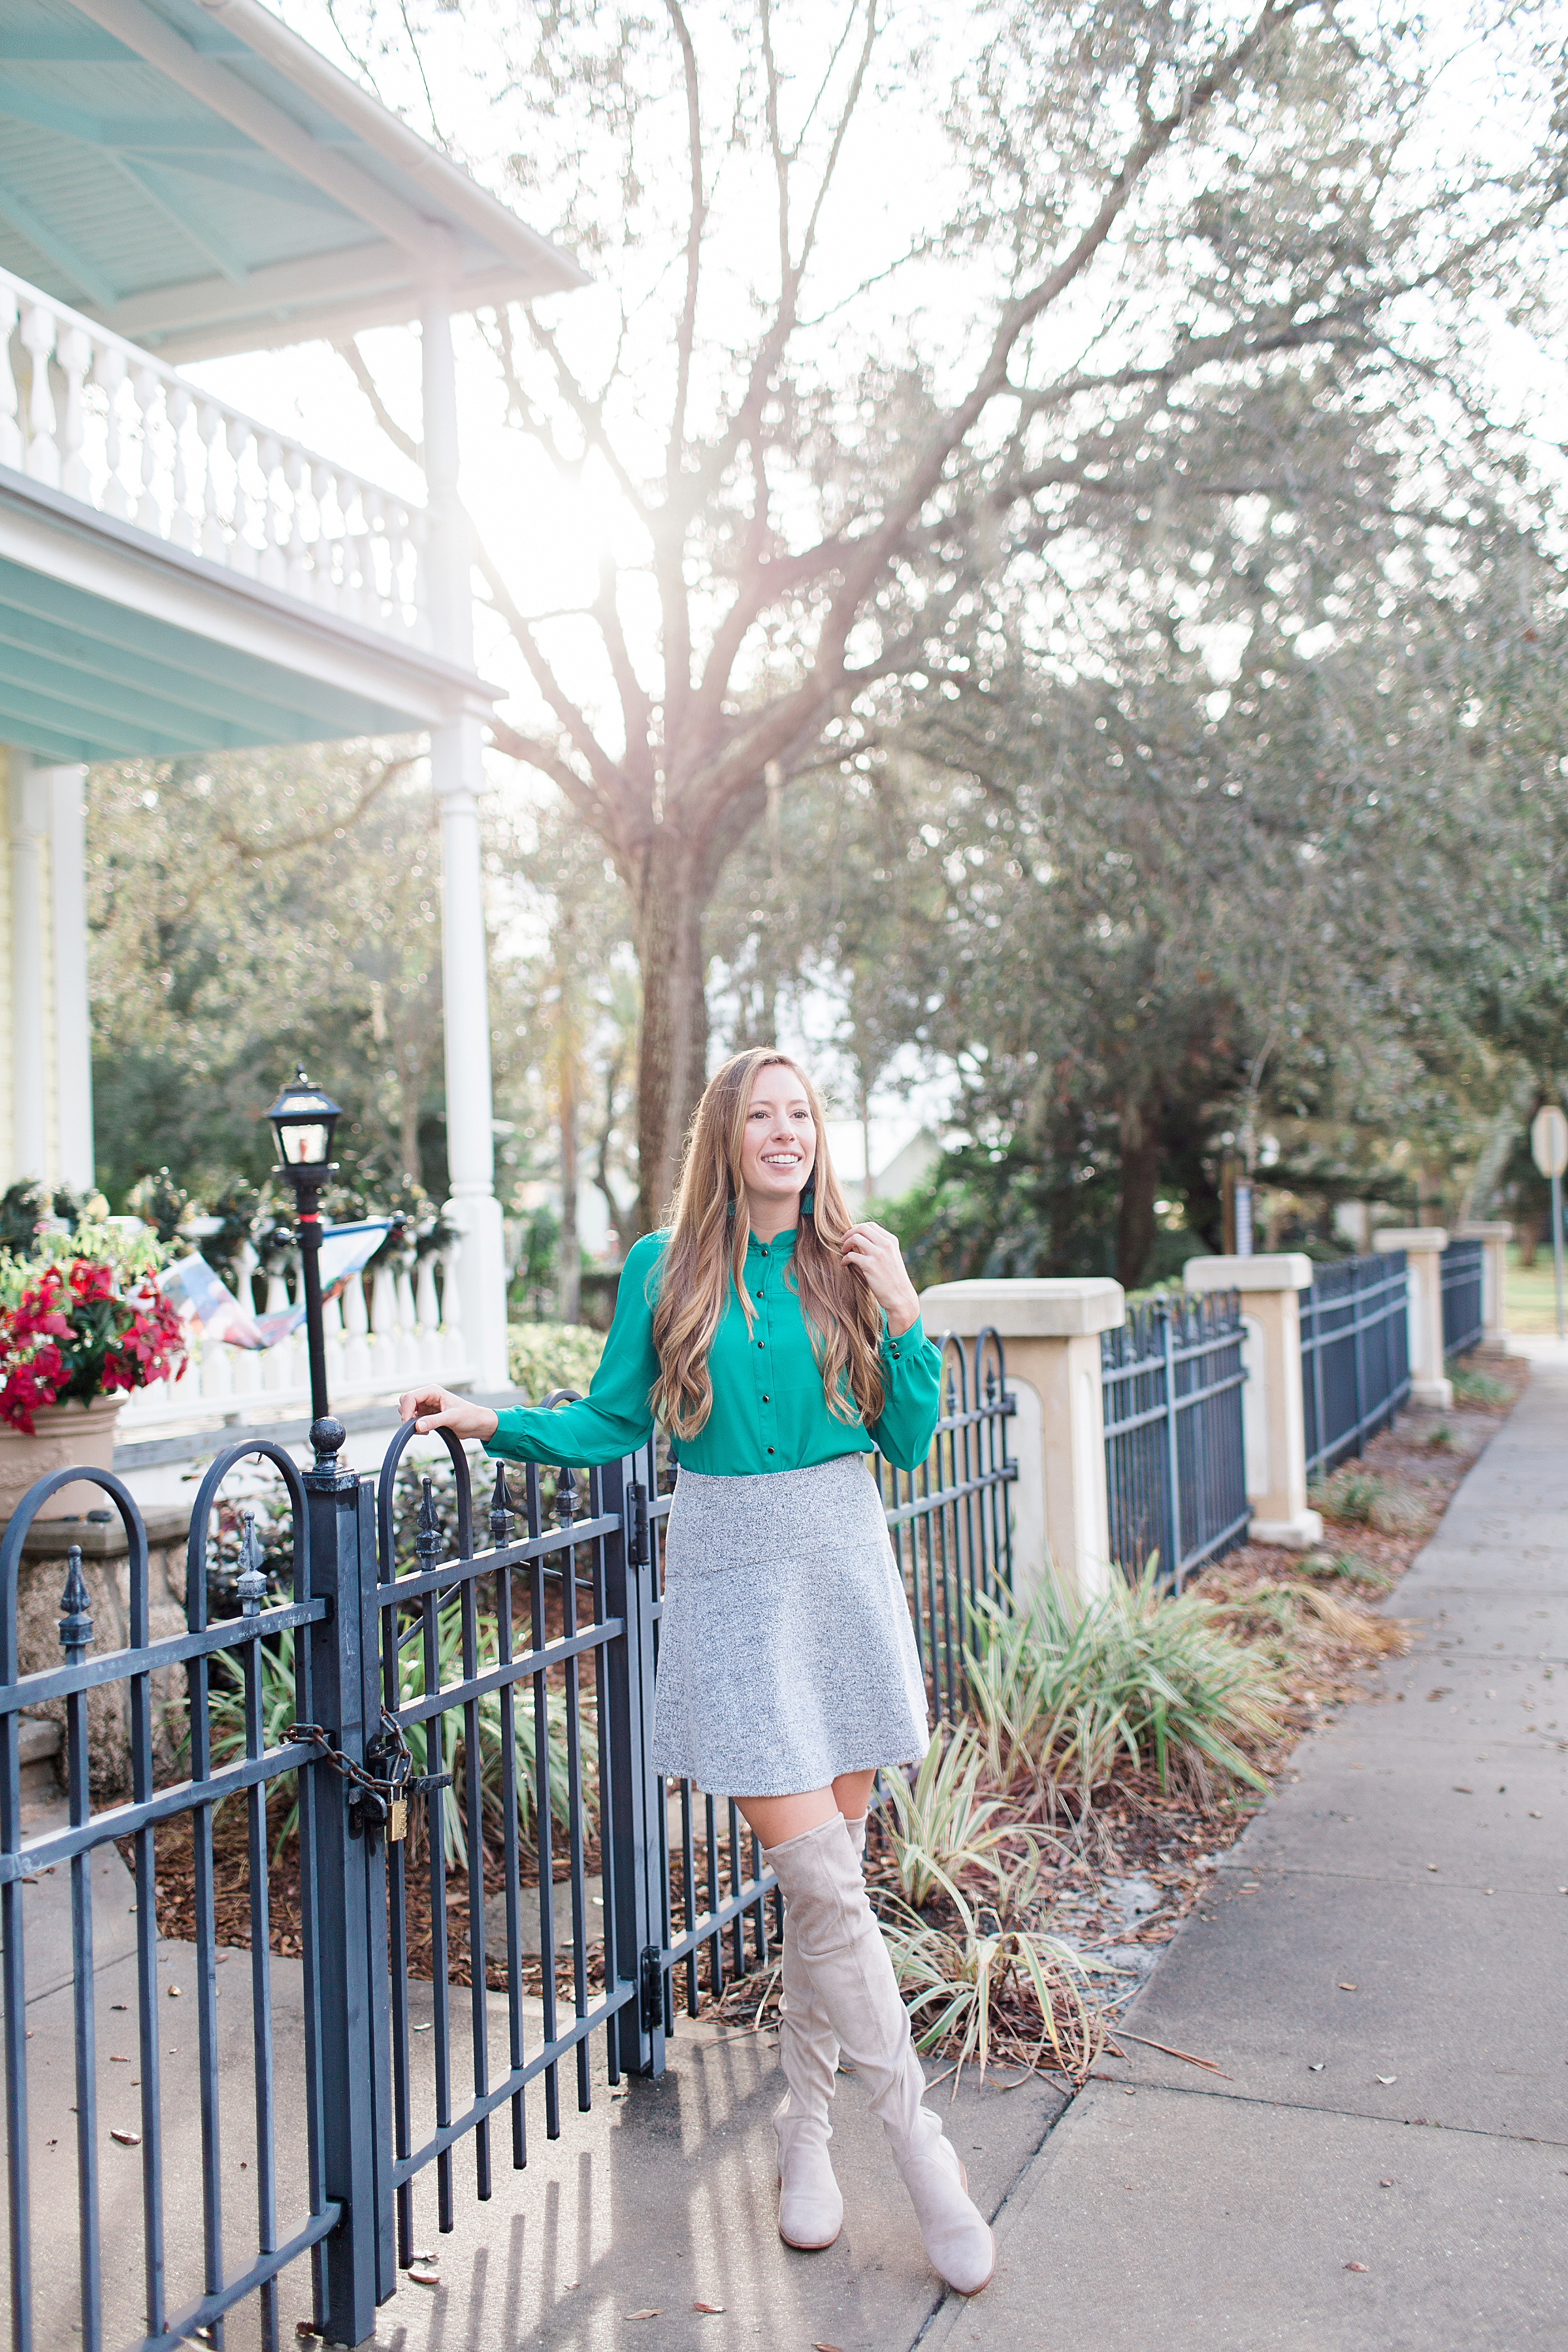 7 Winter Outfit Ideas for Warm Weather / Winter Outfit Inspiration / Grey Skater Skirt / Green Blouse / Grey Over the Knee Boots 